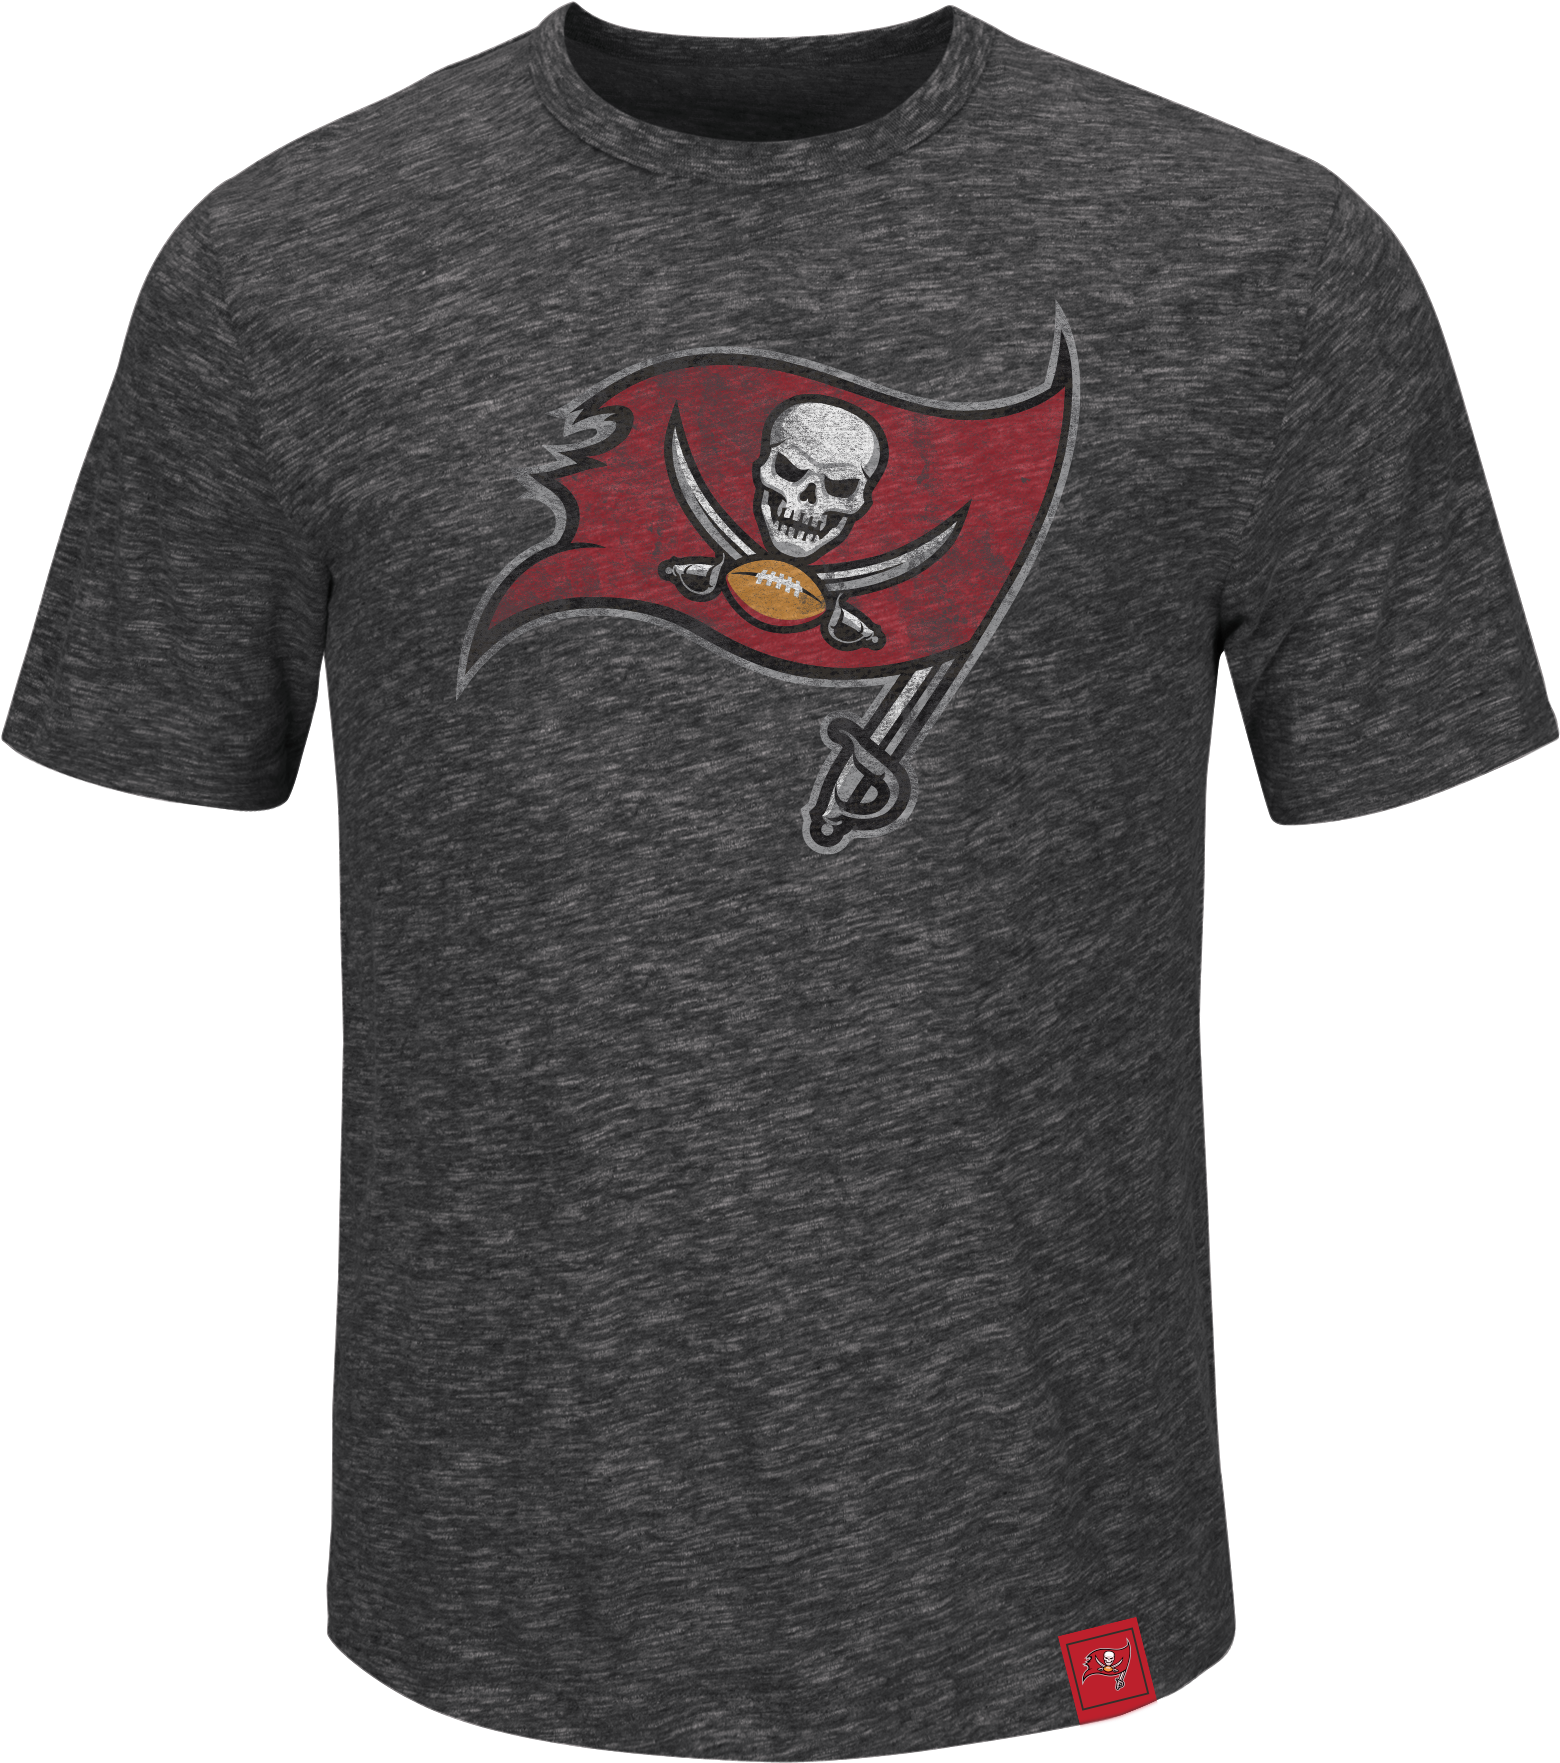 A Grey T-shirt With A Skull And Football